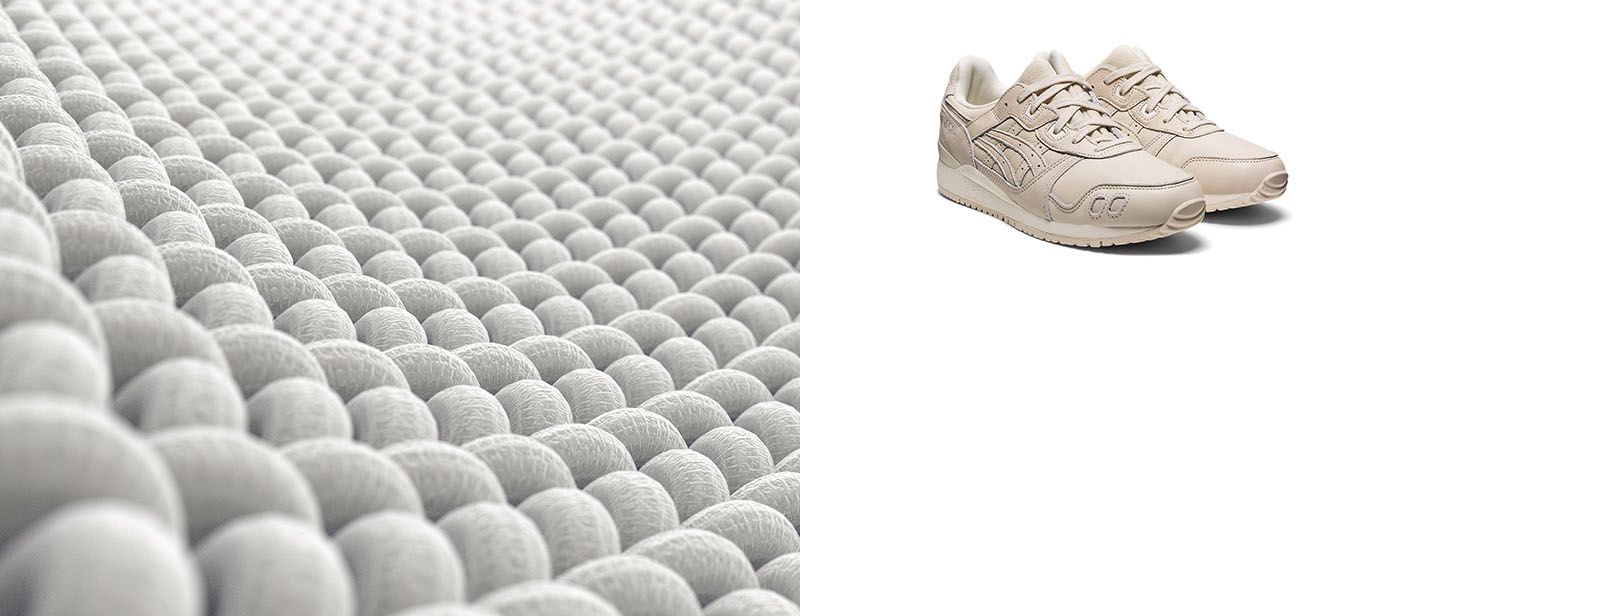 Representational image of Polyester textile and a pair of ASICS sneakers.